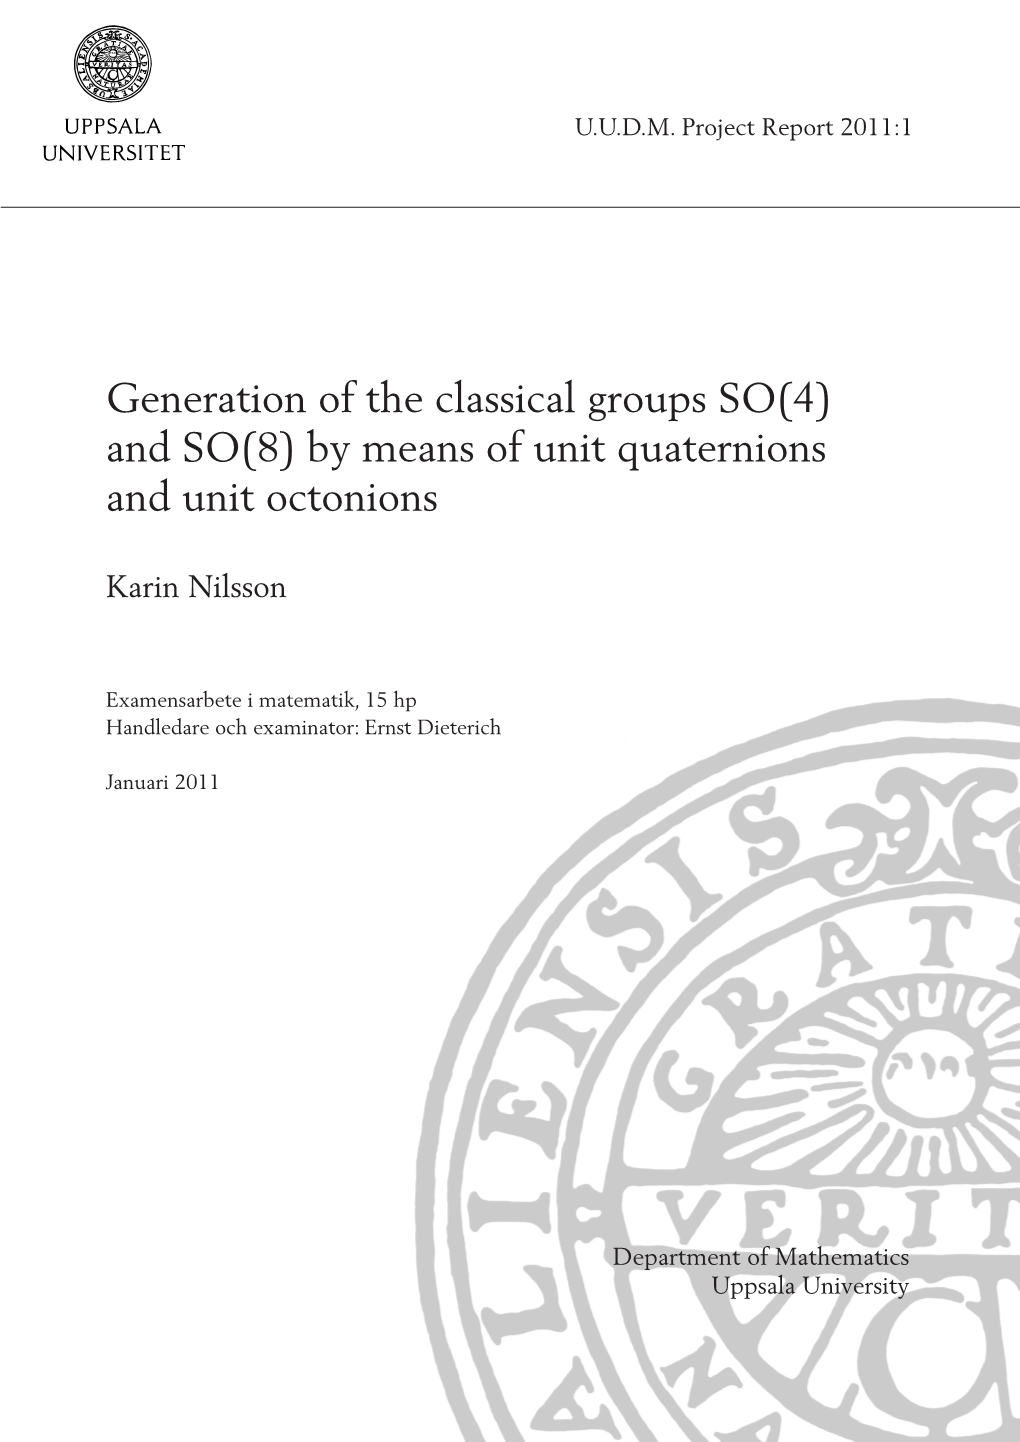 Generation of the Classical Groups SO(4) and SO(8) by Means of Unit Quaternions and Unit Octonions